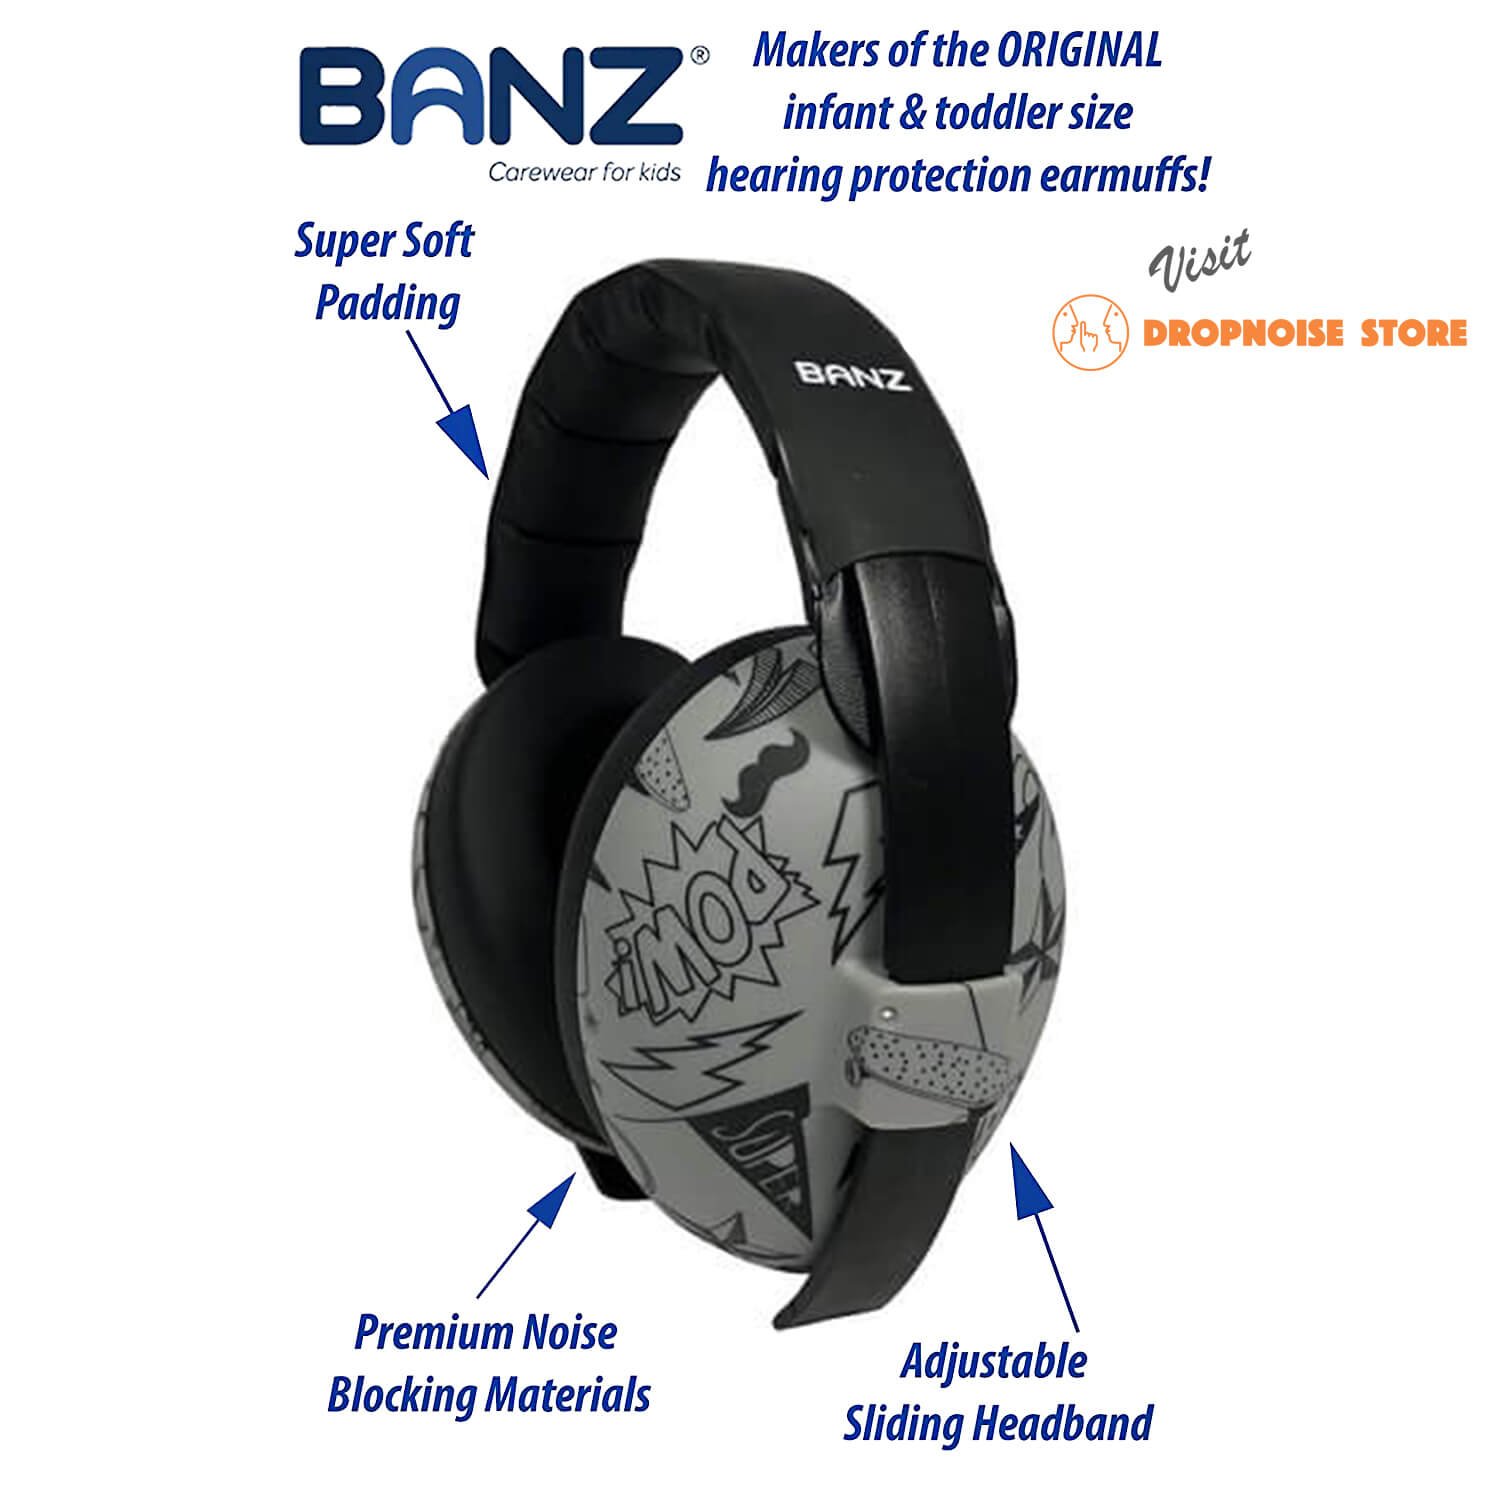 The Best Earmuffs for Babies & Toddlers BANZ Earmuffs Infant Hearing Protection Transport Ages 0-2 Years Industry Leading Noise Reduction Rating Block Noise 